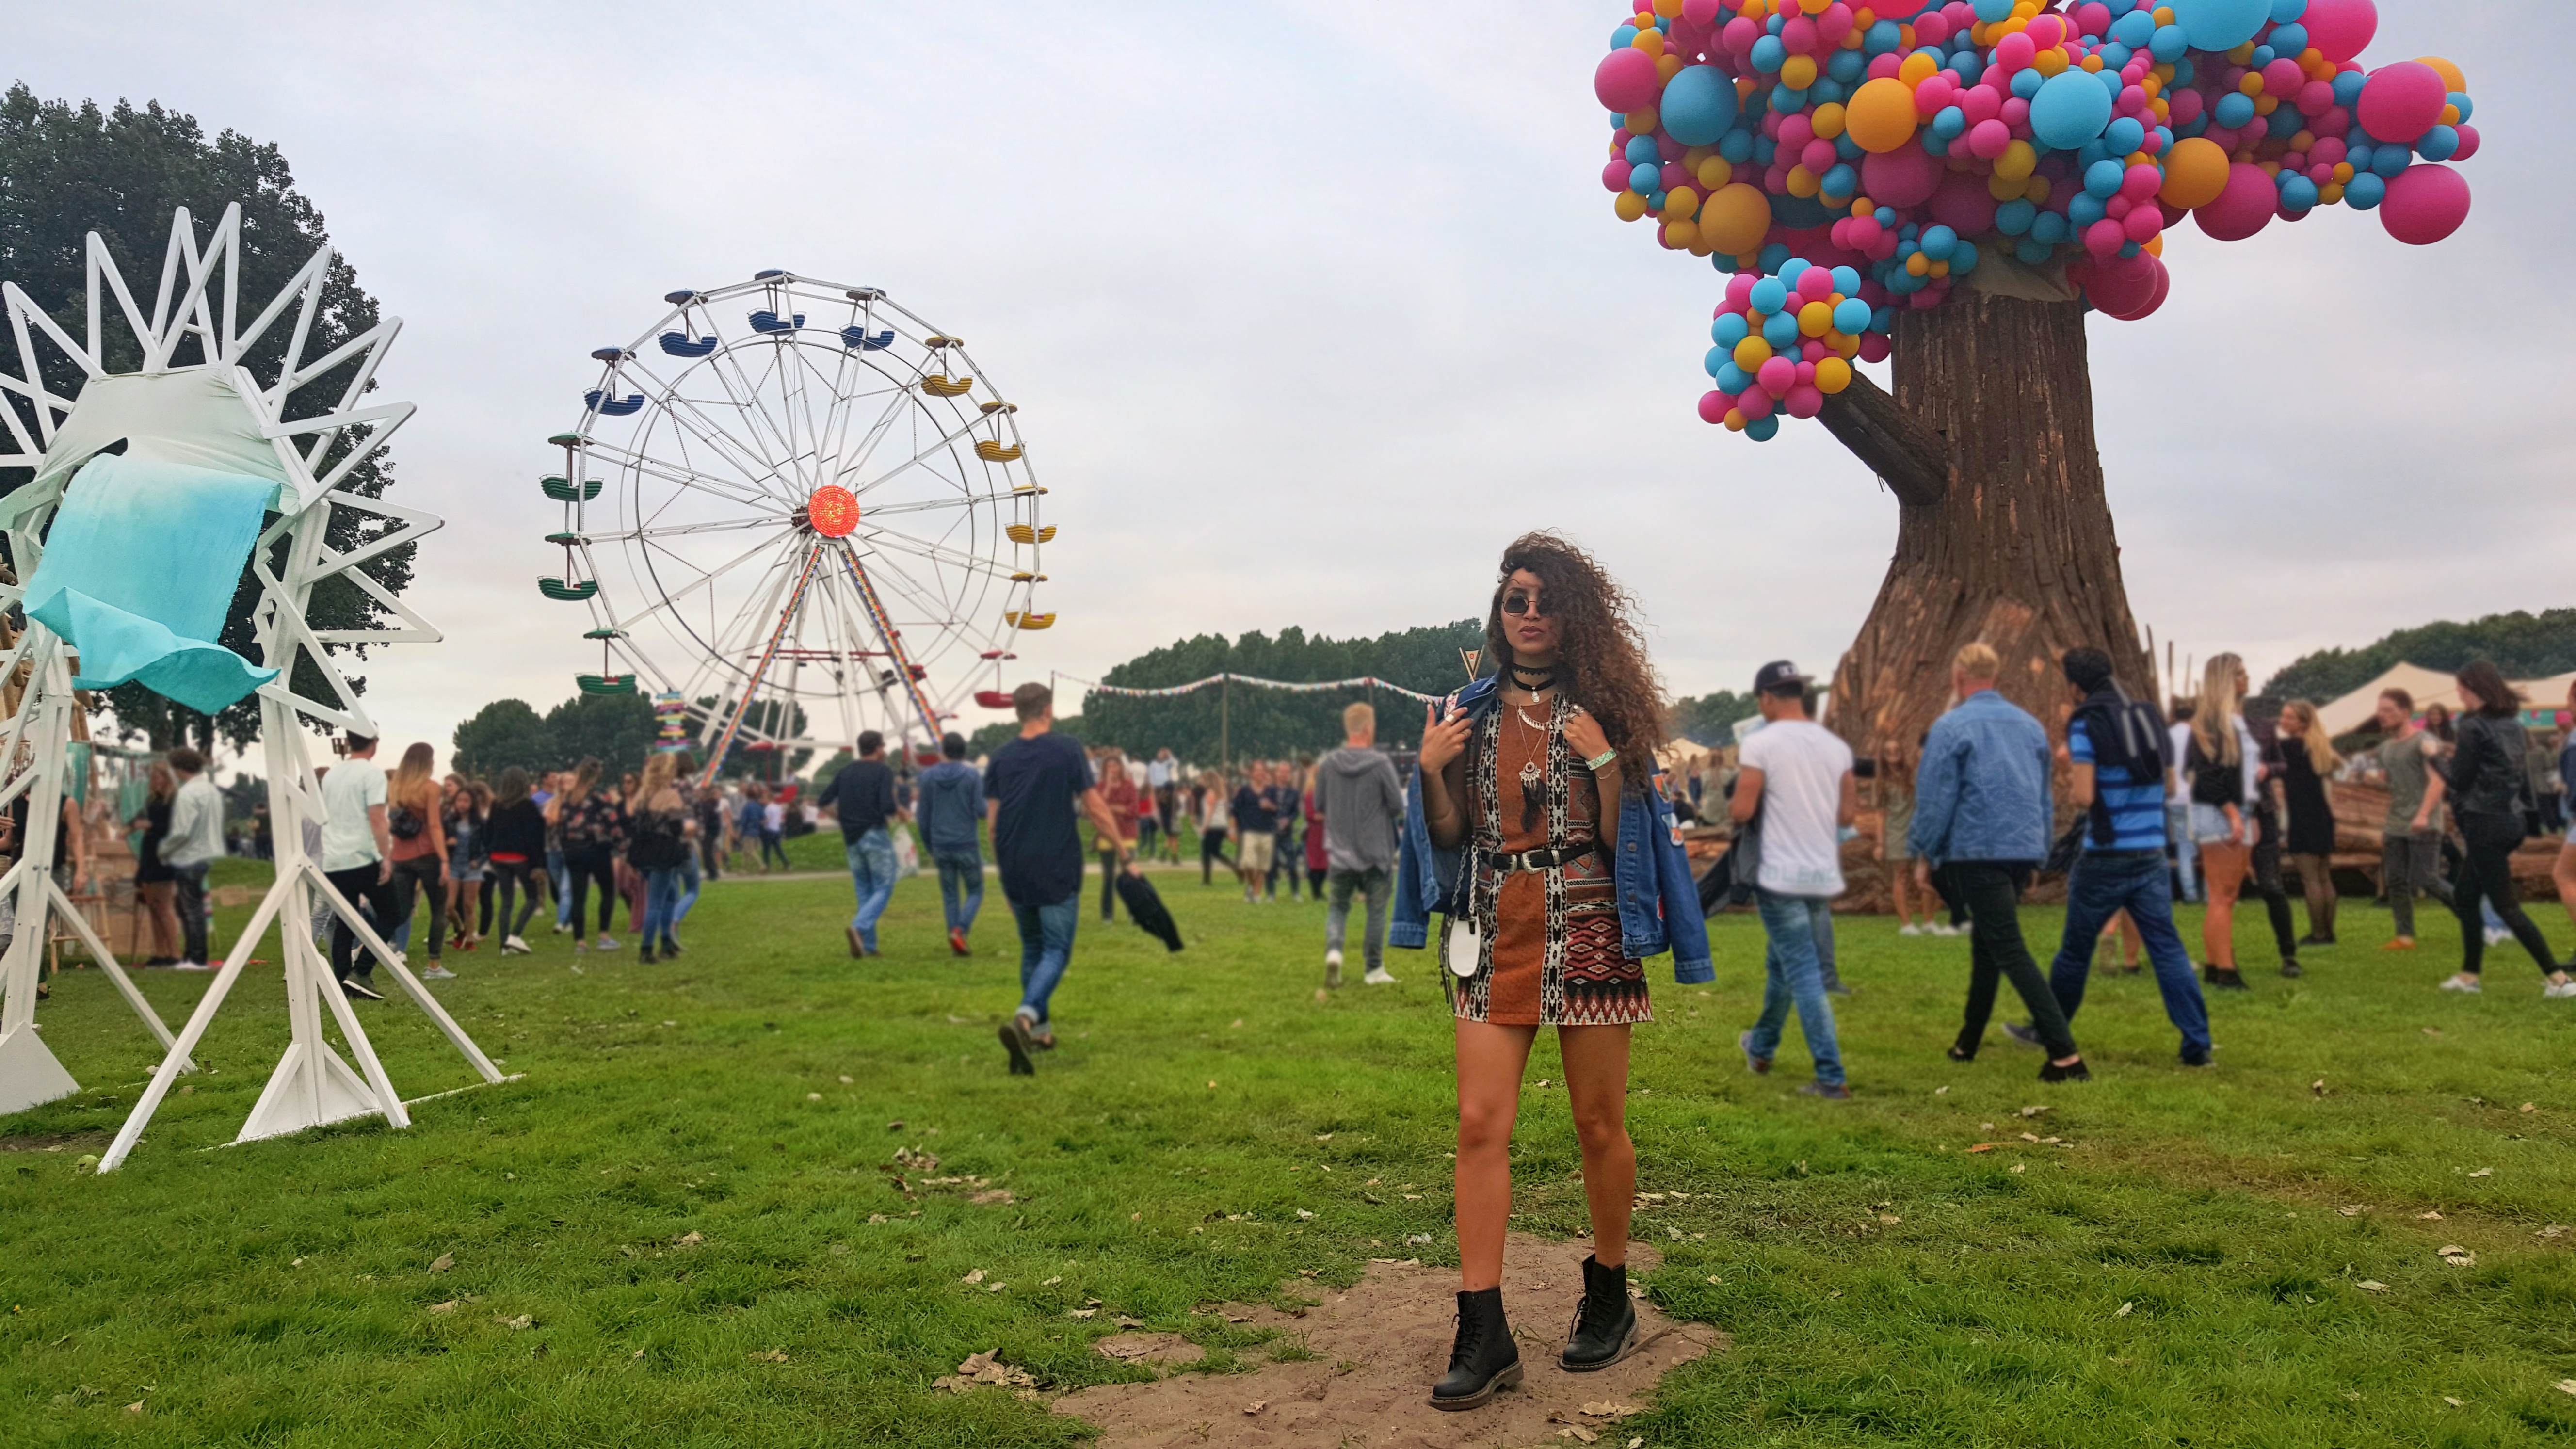 FUN, FRIENDS & FAMILY - FESTIVAL VIBES WITH ZALANDO - FROM HATS TO HEELS